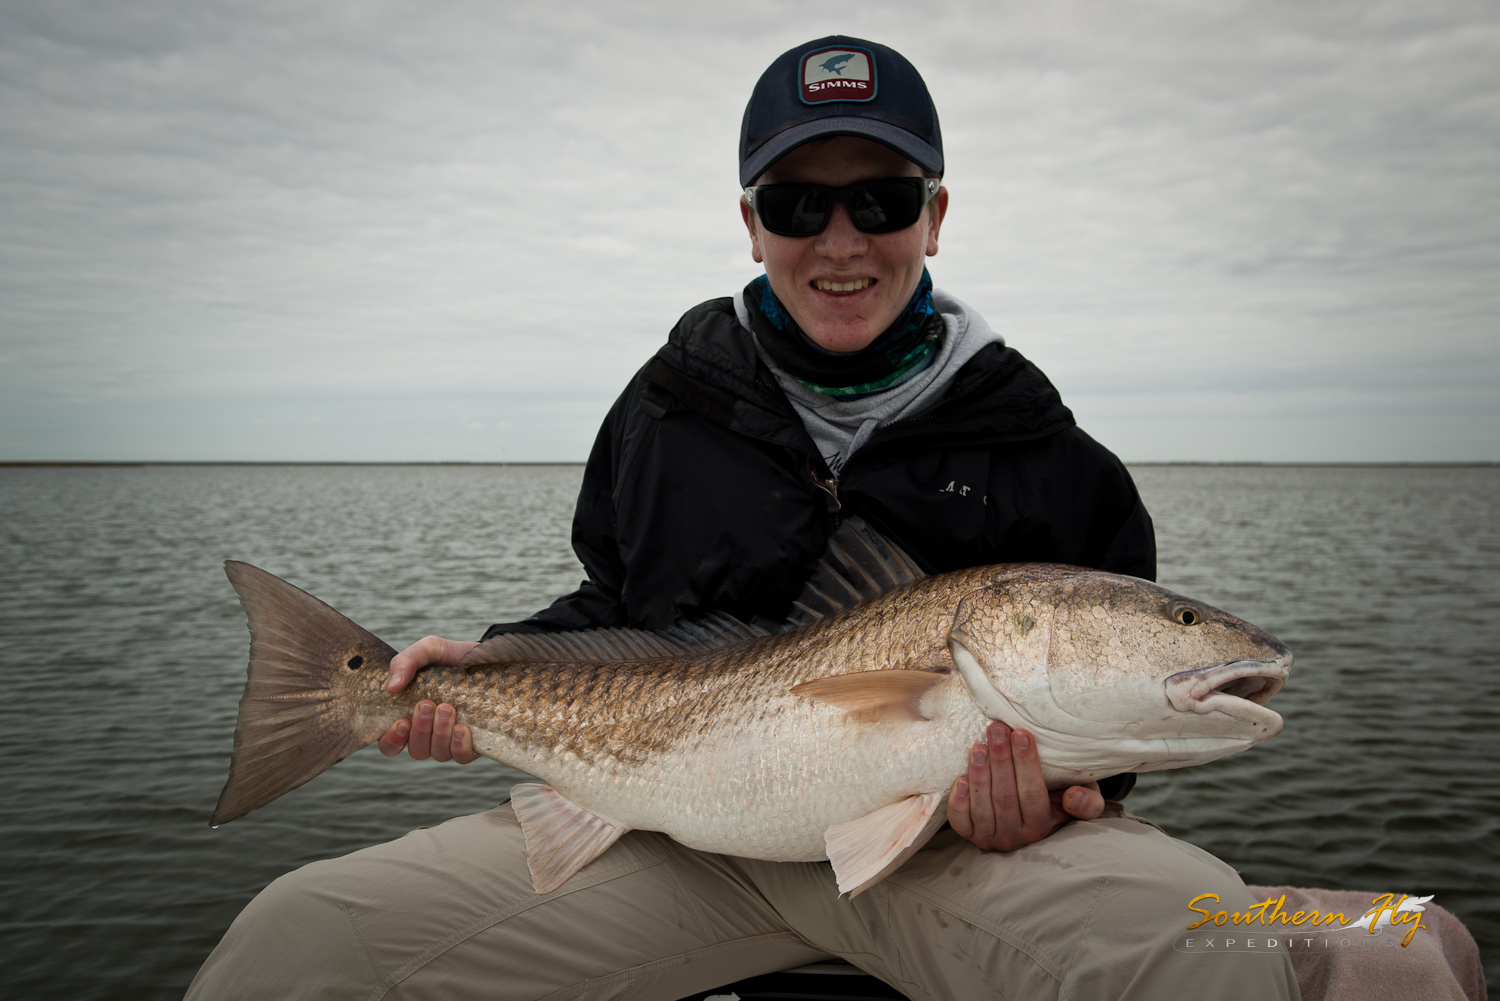 2019-03-08-09_SouthernFlyExpeditions_NewOrleans_TimFrank&Carson-1.jpg